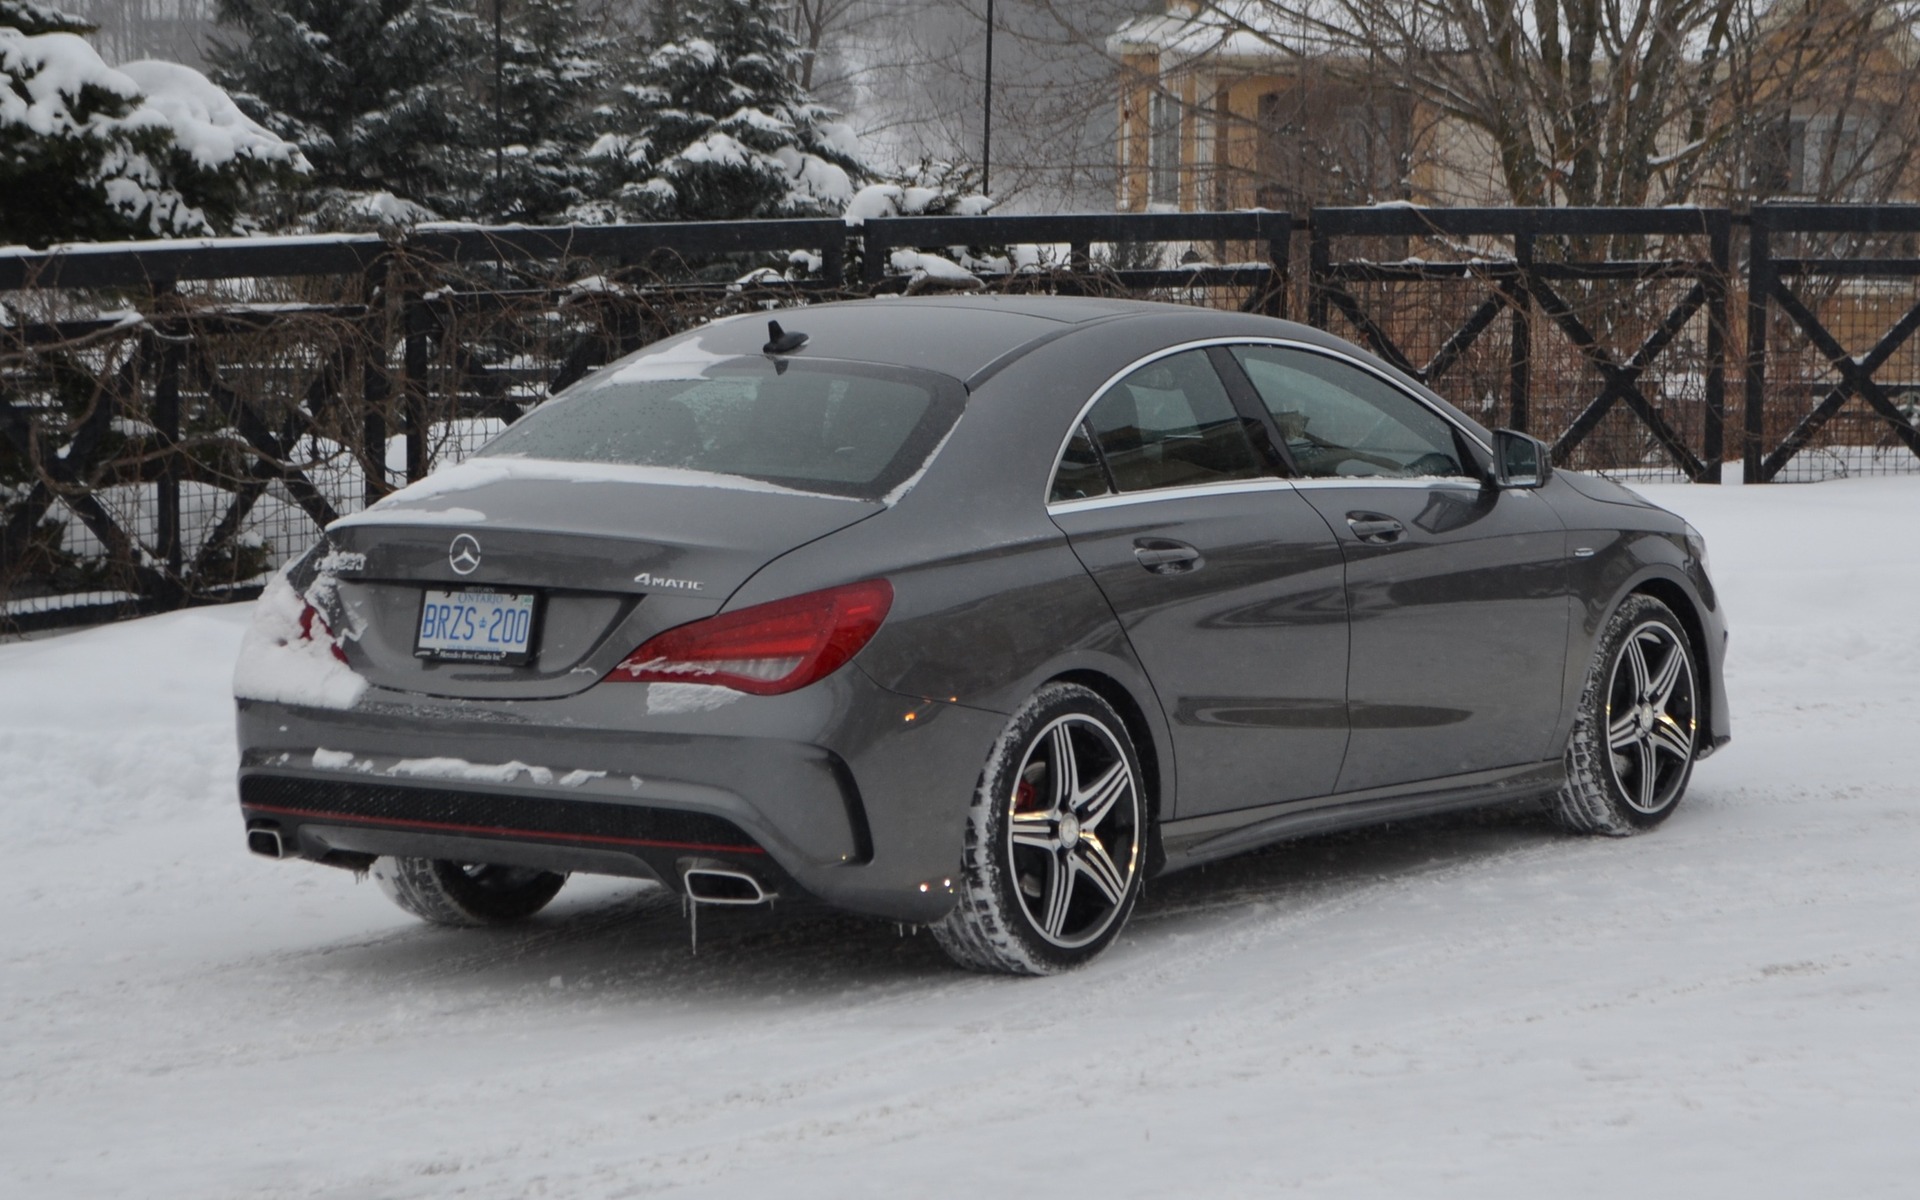 Mercedes-Benz CLA 250 4Matic: The 4Matic AWD adds about 40 kilos ...